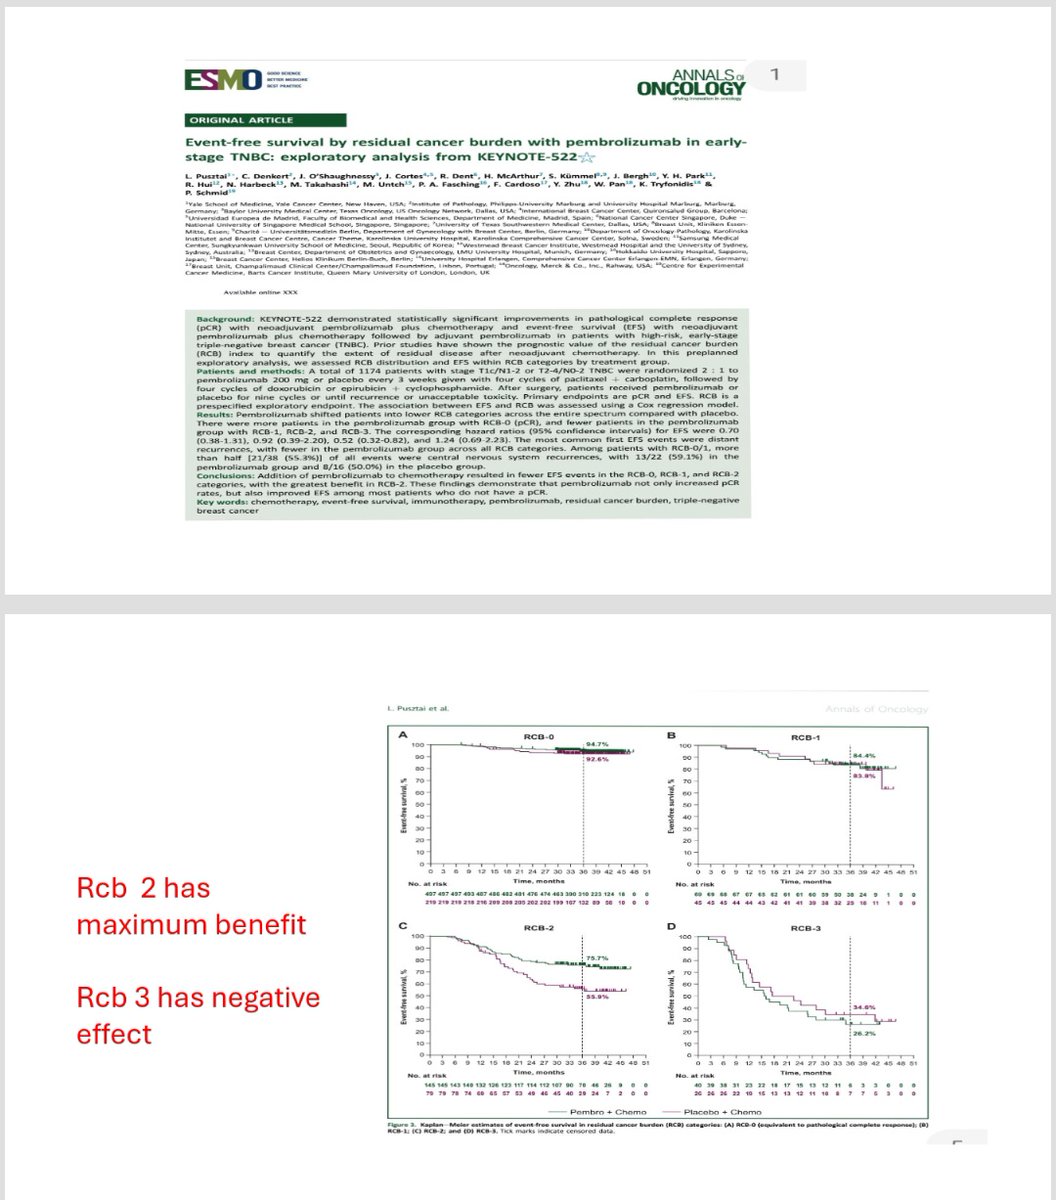 Keynote 522 . Pembrolizumab in early stage TNBC shows OS benifit. We will love to see the OS data in with those with PCR and those who did not achieve PCR and Based Upon RCB . Remember the EFS benifit was maximum in RCB -2 and RCB -3 had infact detrimental EFS . @stolaney1